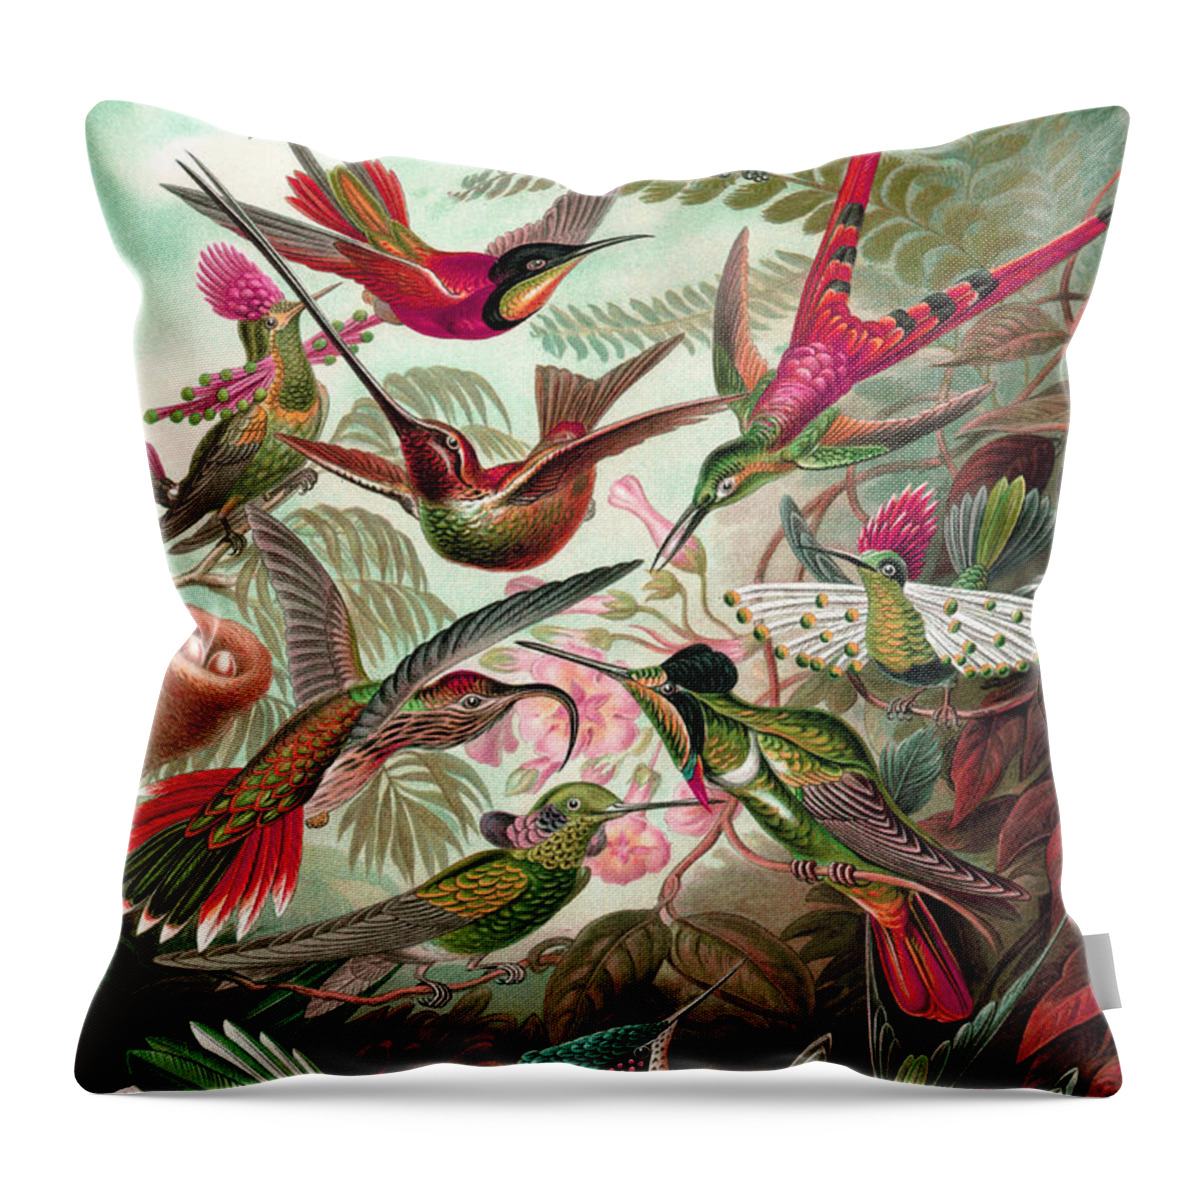 Ernst Haeckel Throw Pillow featuring the drawing Trochilidae by Ernst Haeckel #1 by Mango Art